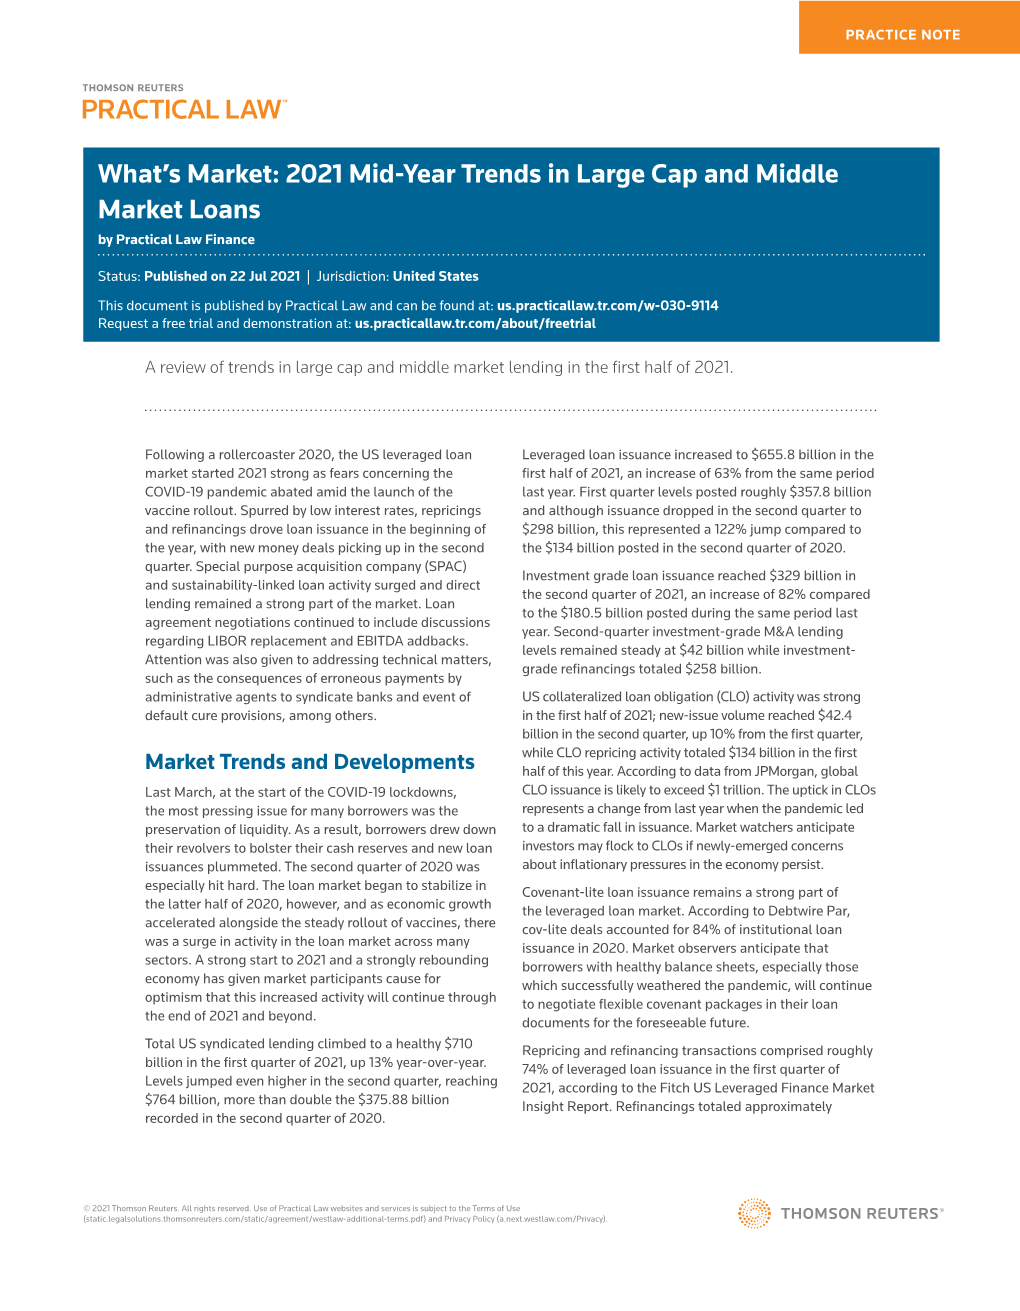 2021 Mid-Year Trends in Large Cap and Middle Market Loans by Practical Law Finance